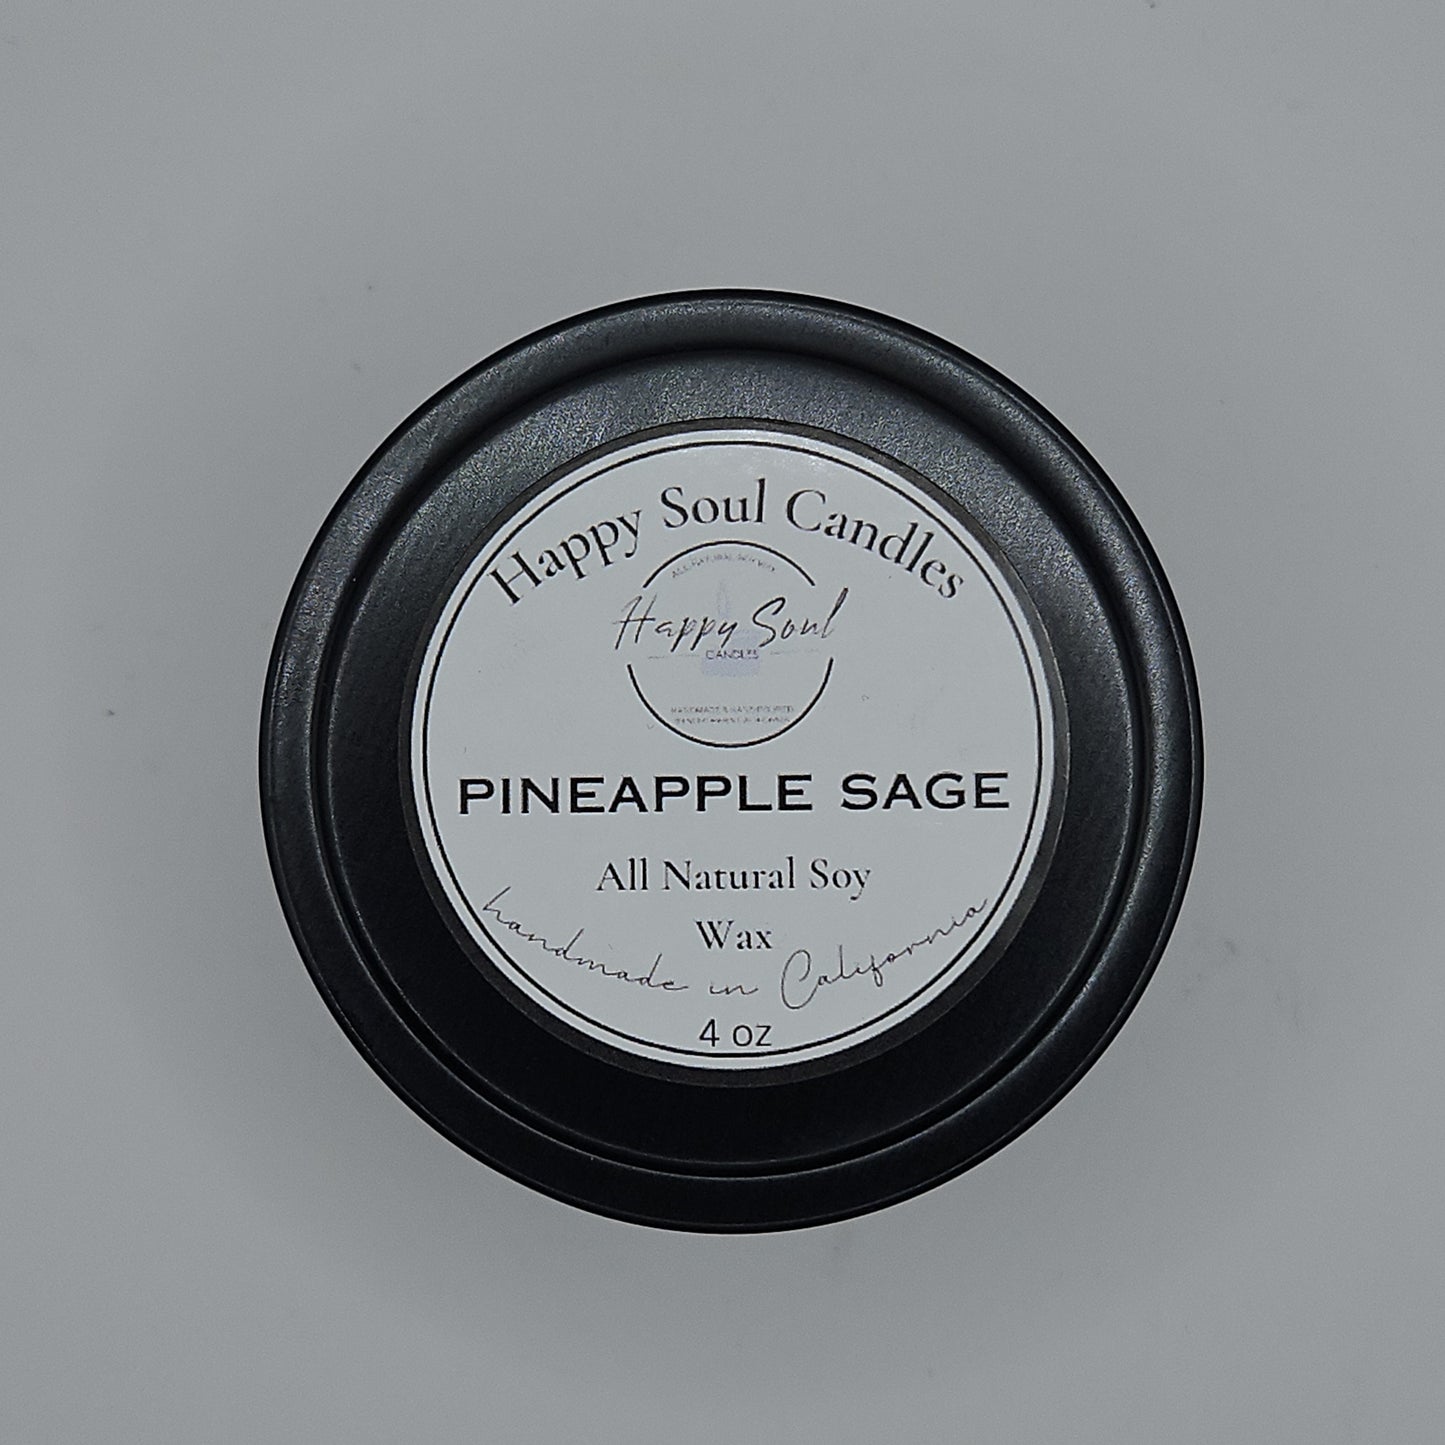 Pineapple Sage Soy Candle 4 oz Travel Tin